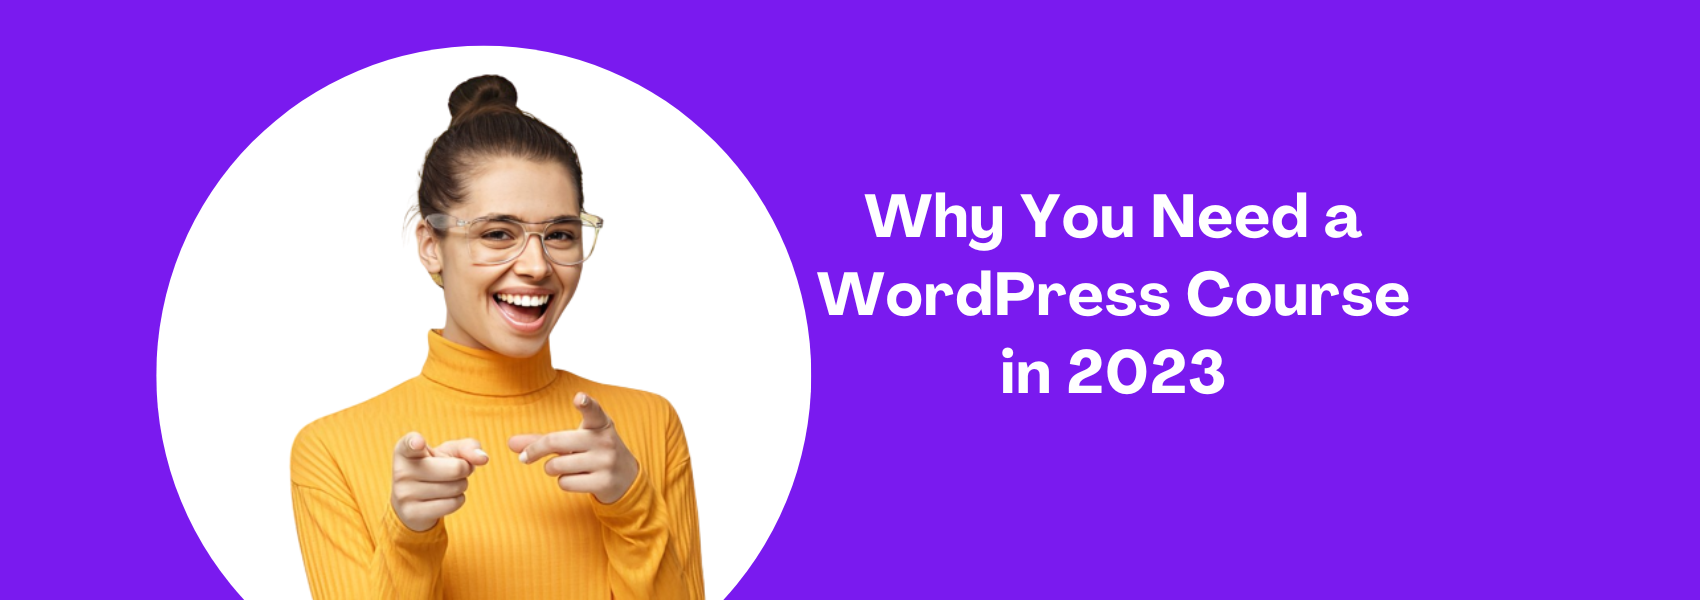 Why You Need A WordPress Course in 2023